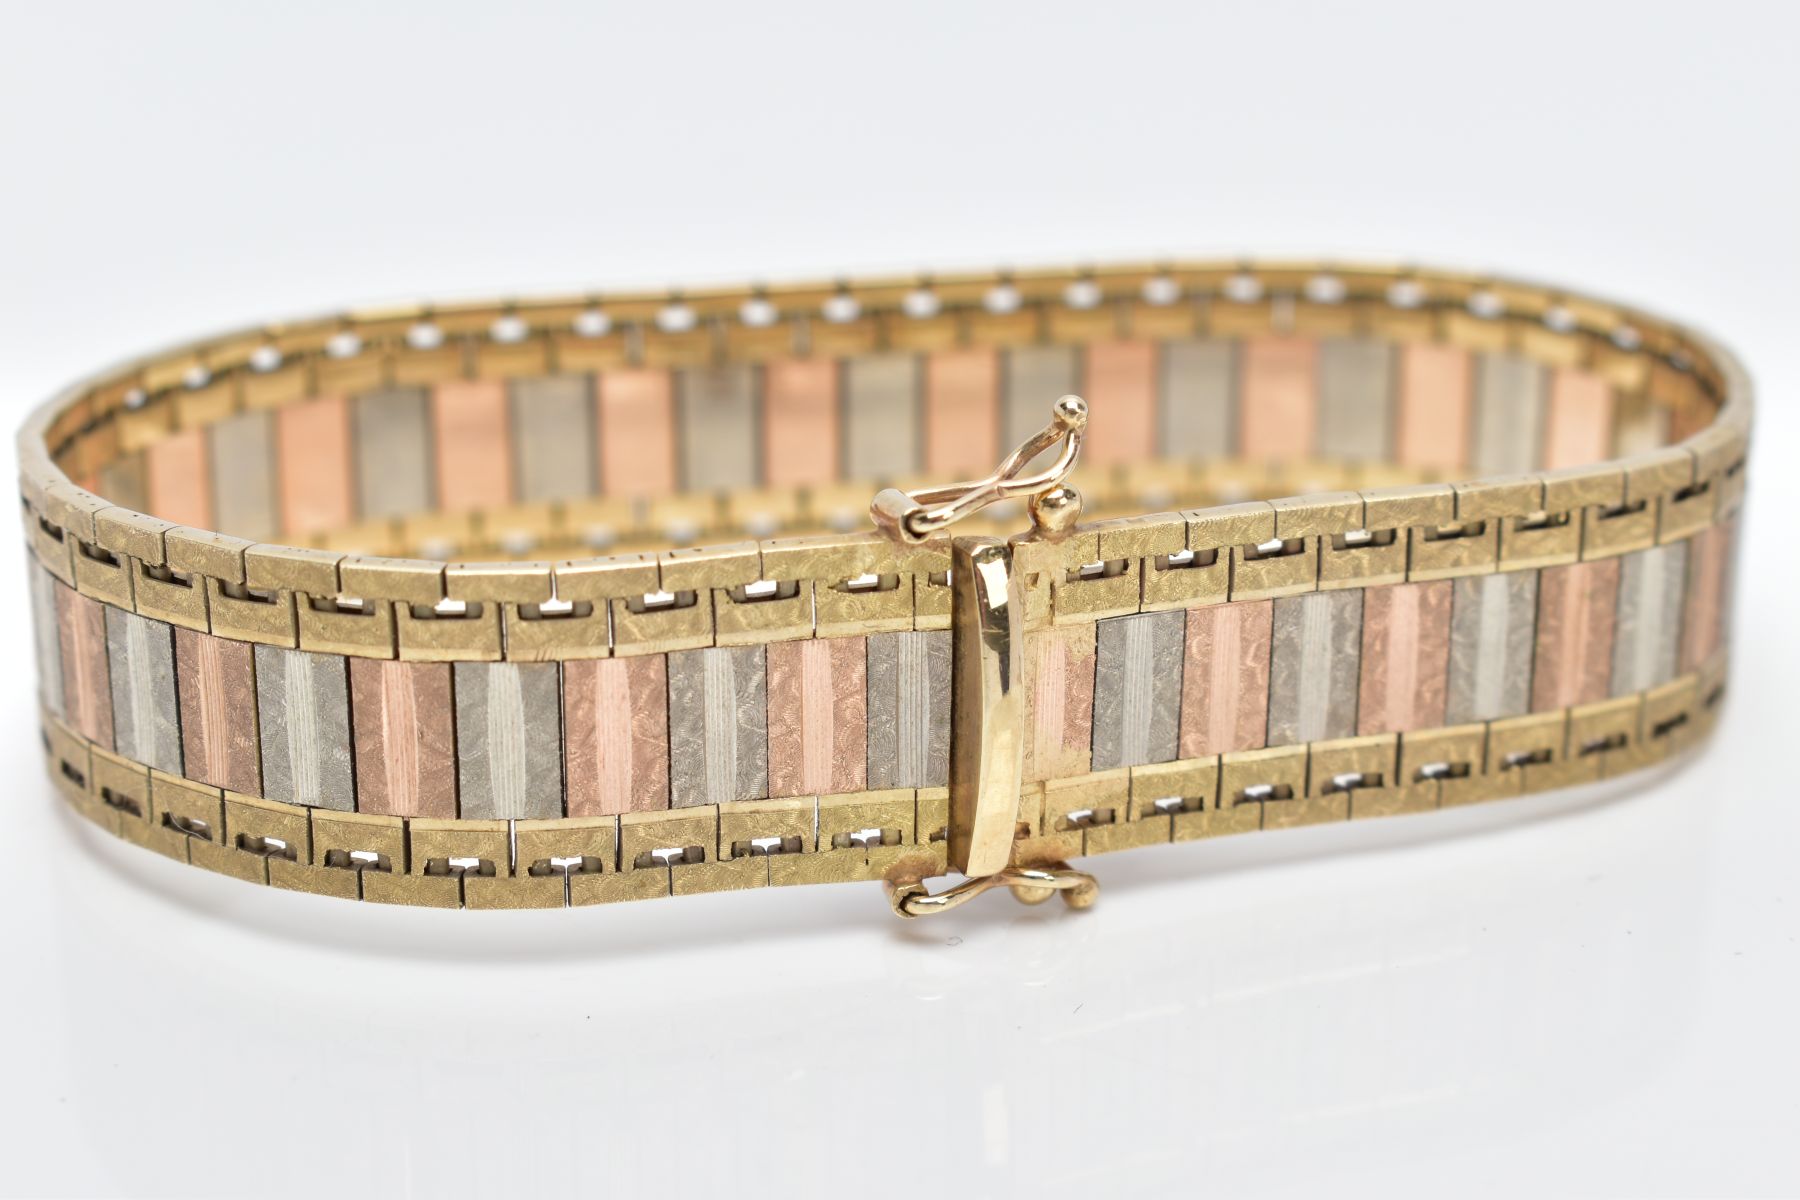 A 9CT TRI-COLOURED GOLD WIDE FLAT LINK BRACELET, designed with textured yellow, rose and white - Image 5 of 5